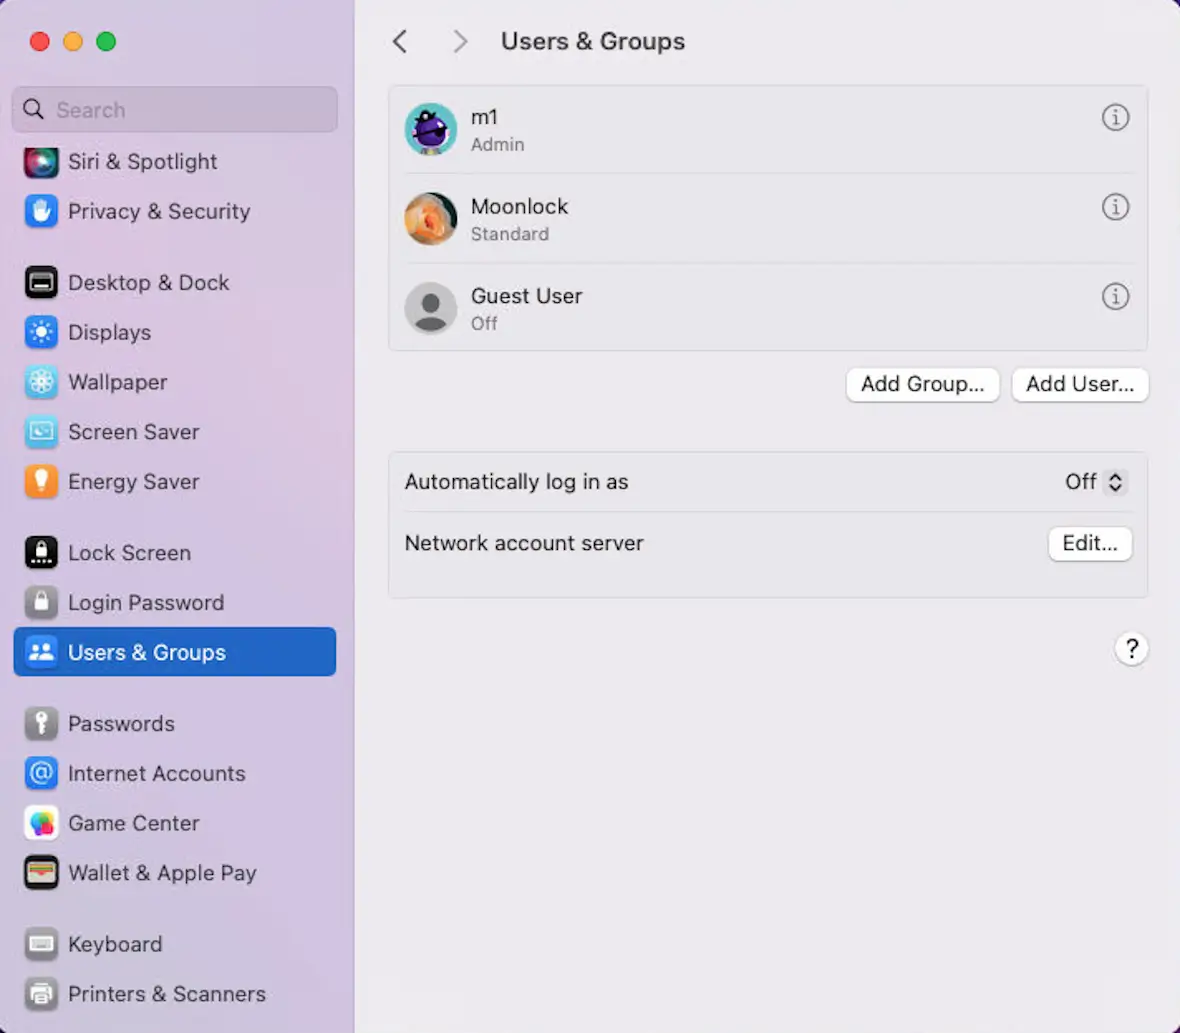 A screenshot of Mac OS X Privacy and Security settings page showing Users and Groups. User accounts are listed showing whether they are standard or administrator users.